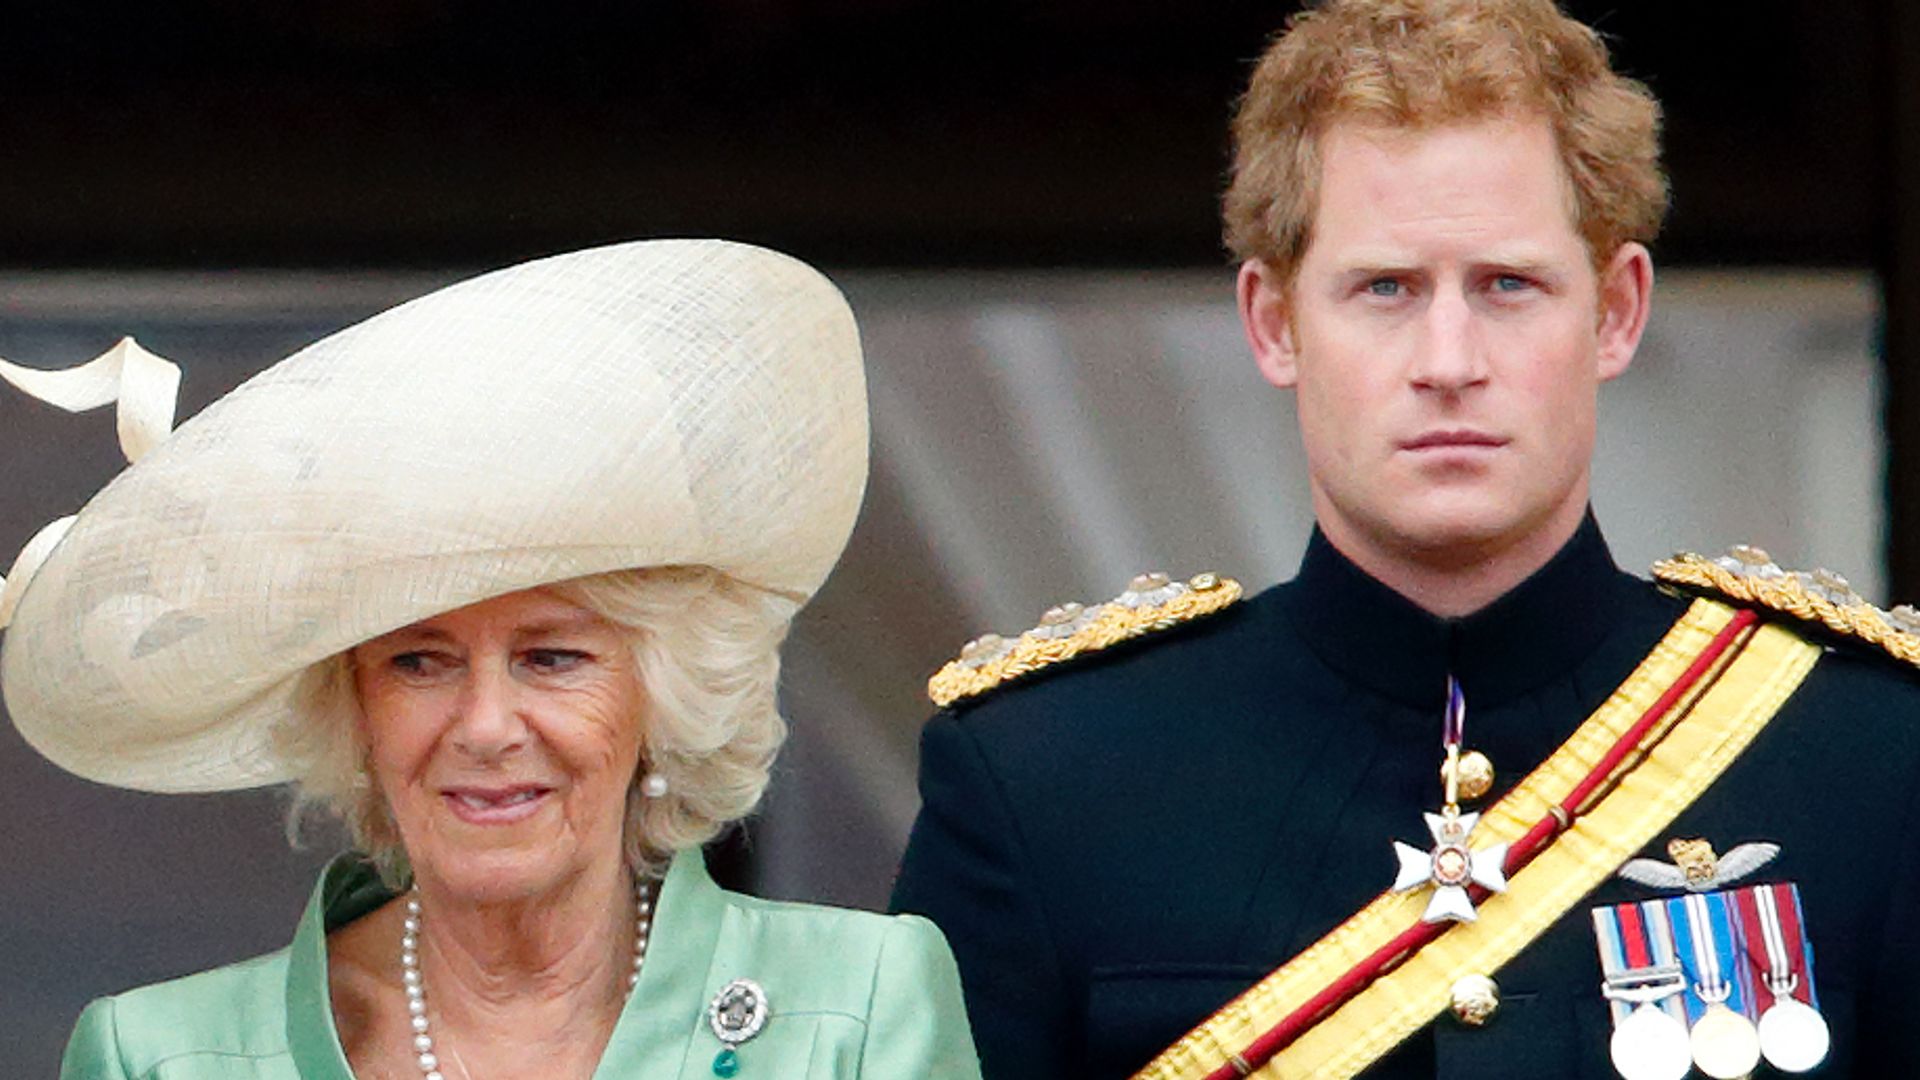 Queen Camilla in a green coat and Prince Harry in his black military uniform